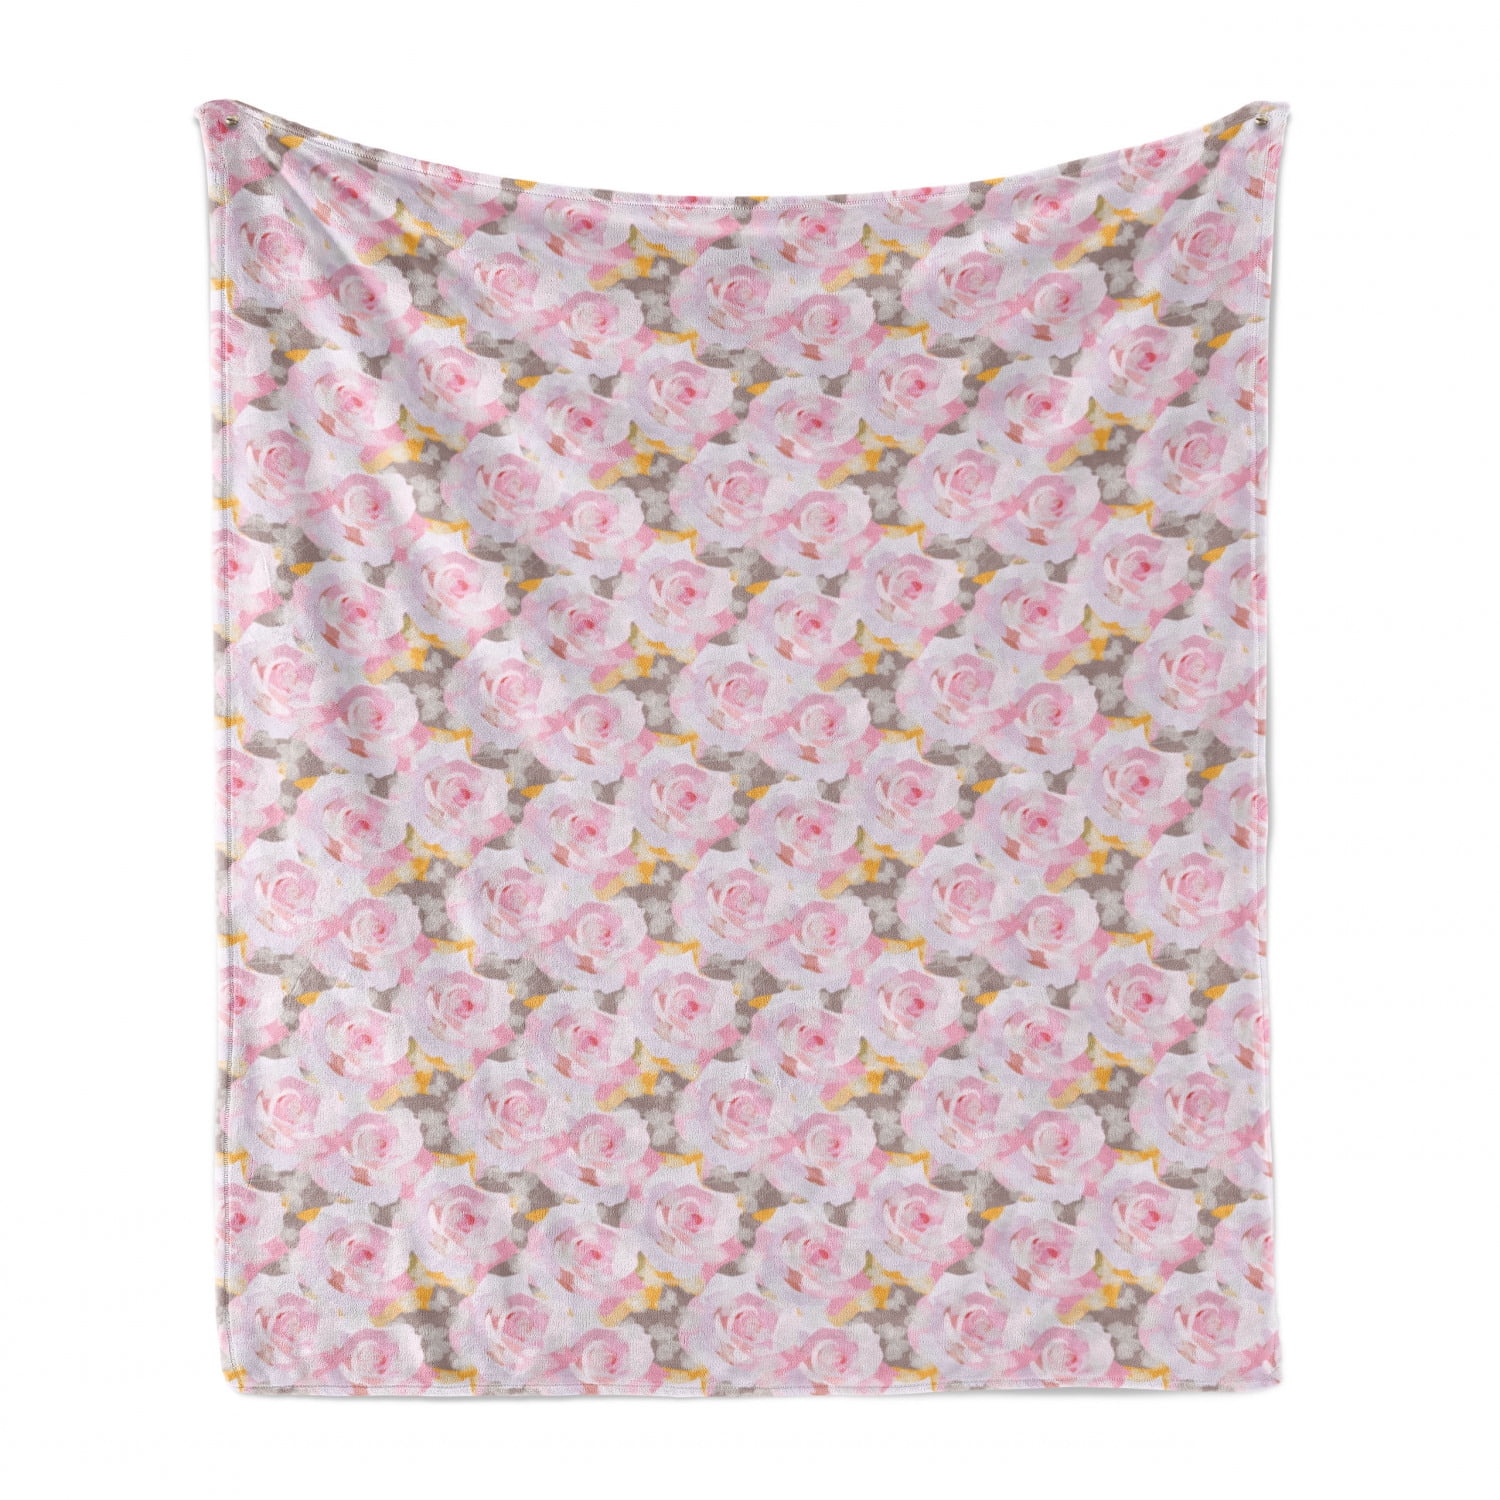 Rose Pale Orange Print of Pastel Pink Tones Roses Butterflies Romantic Design Composition 60 x 80 Ambesonne Landscape Soft Flannel Fleece Throw Blanket Cozy Plush for Indoor and Outdoor Use